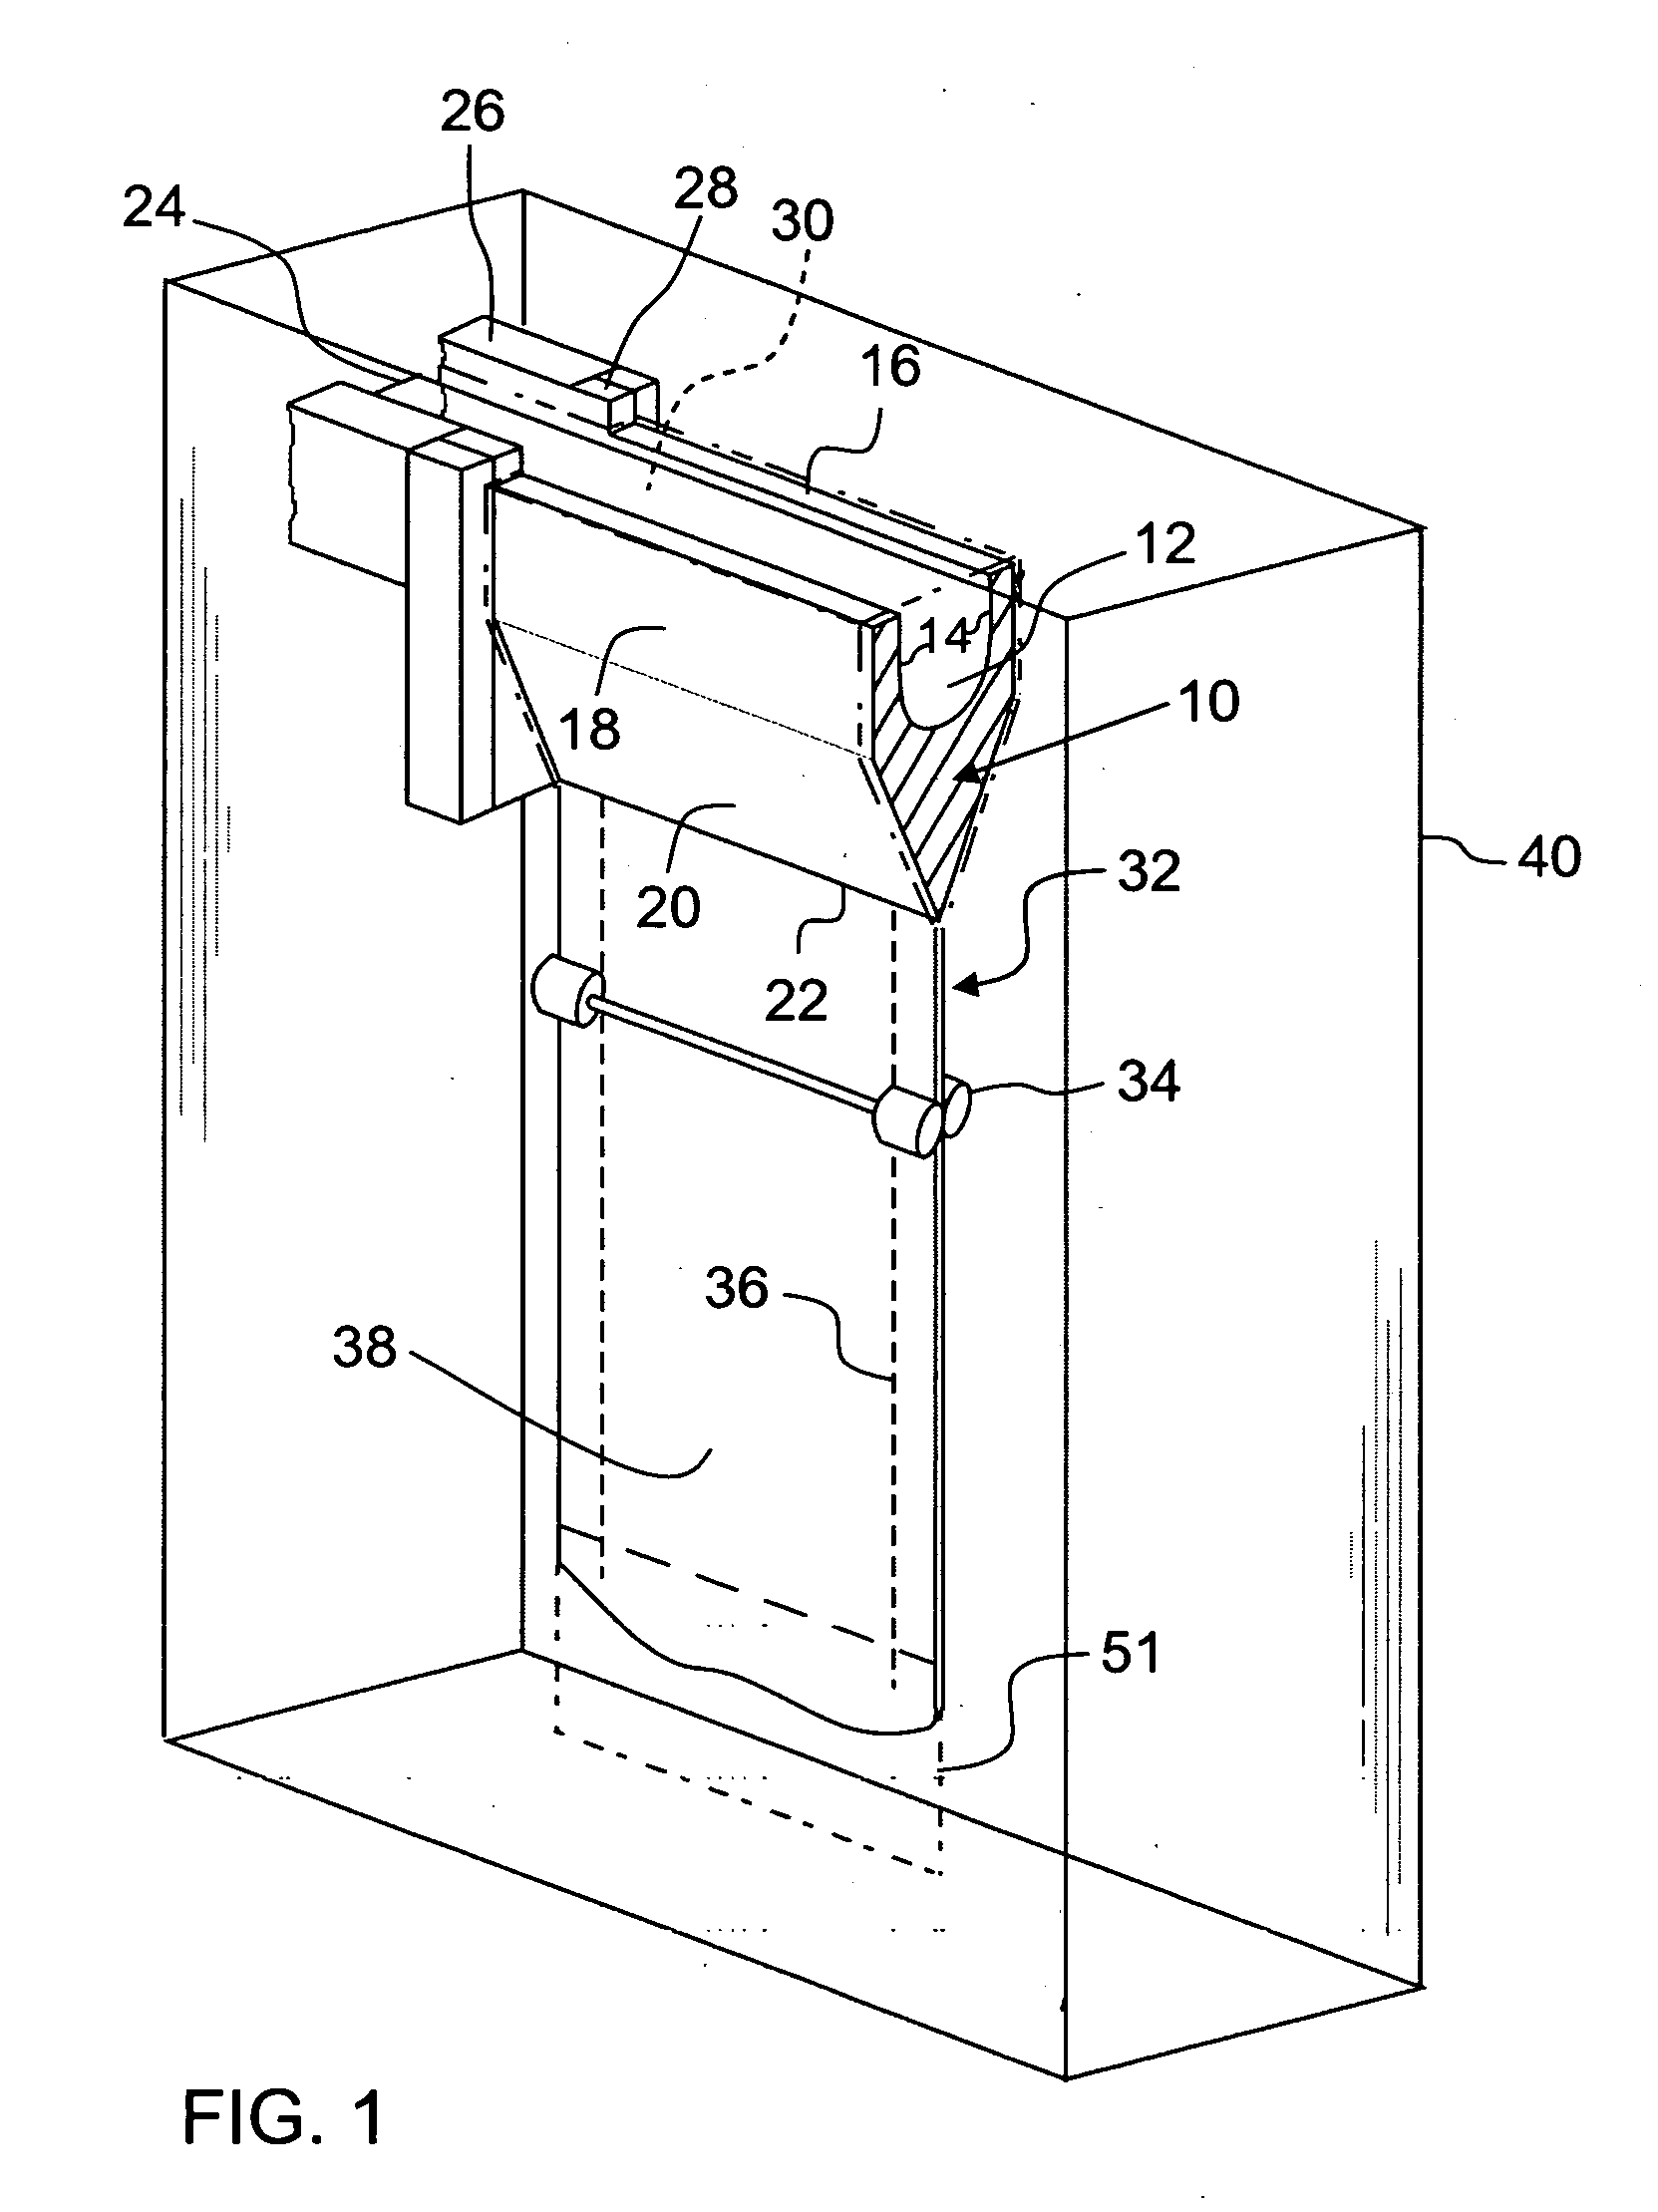 Method and apparatus for characterizing a glass ribbon